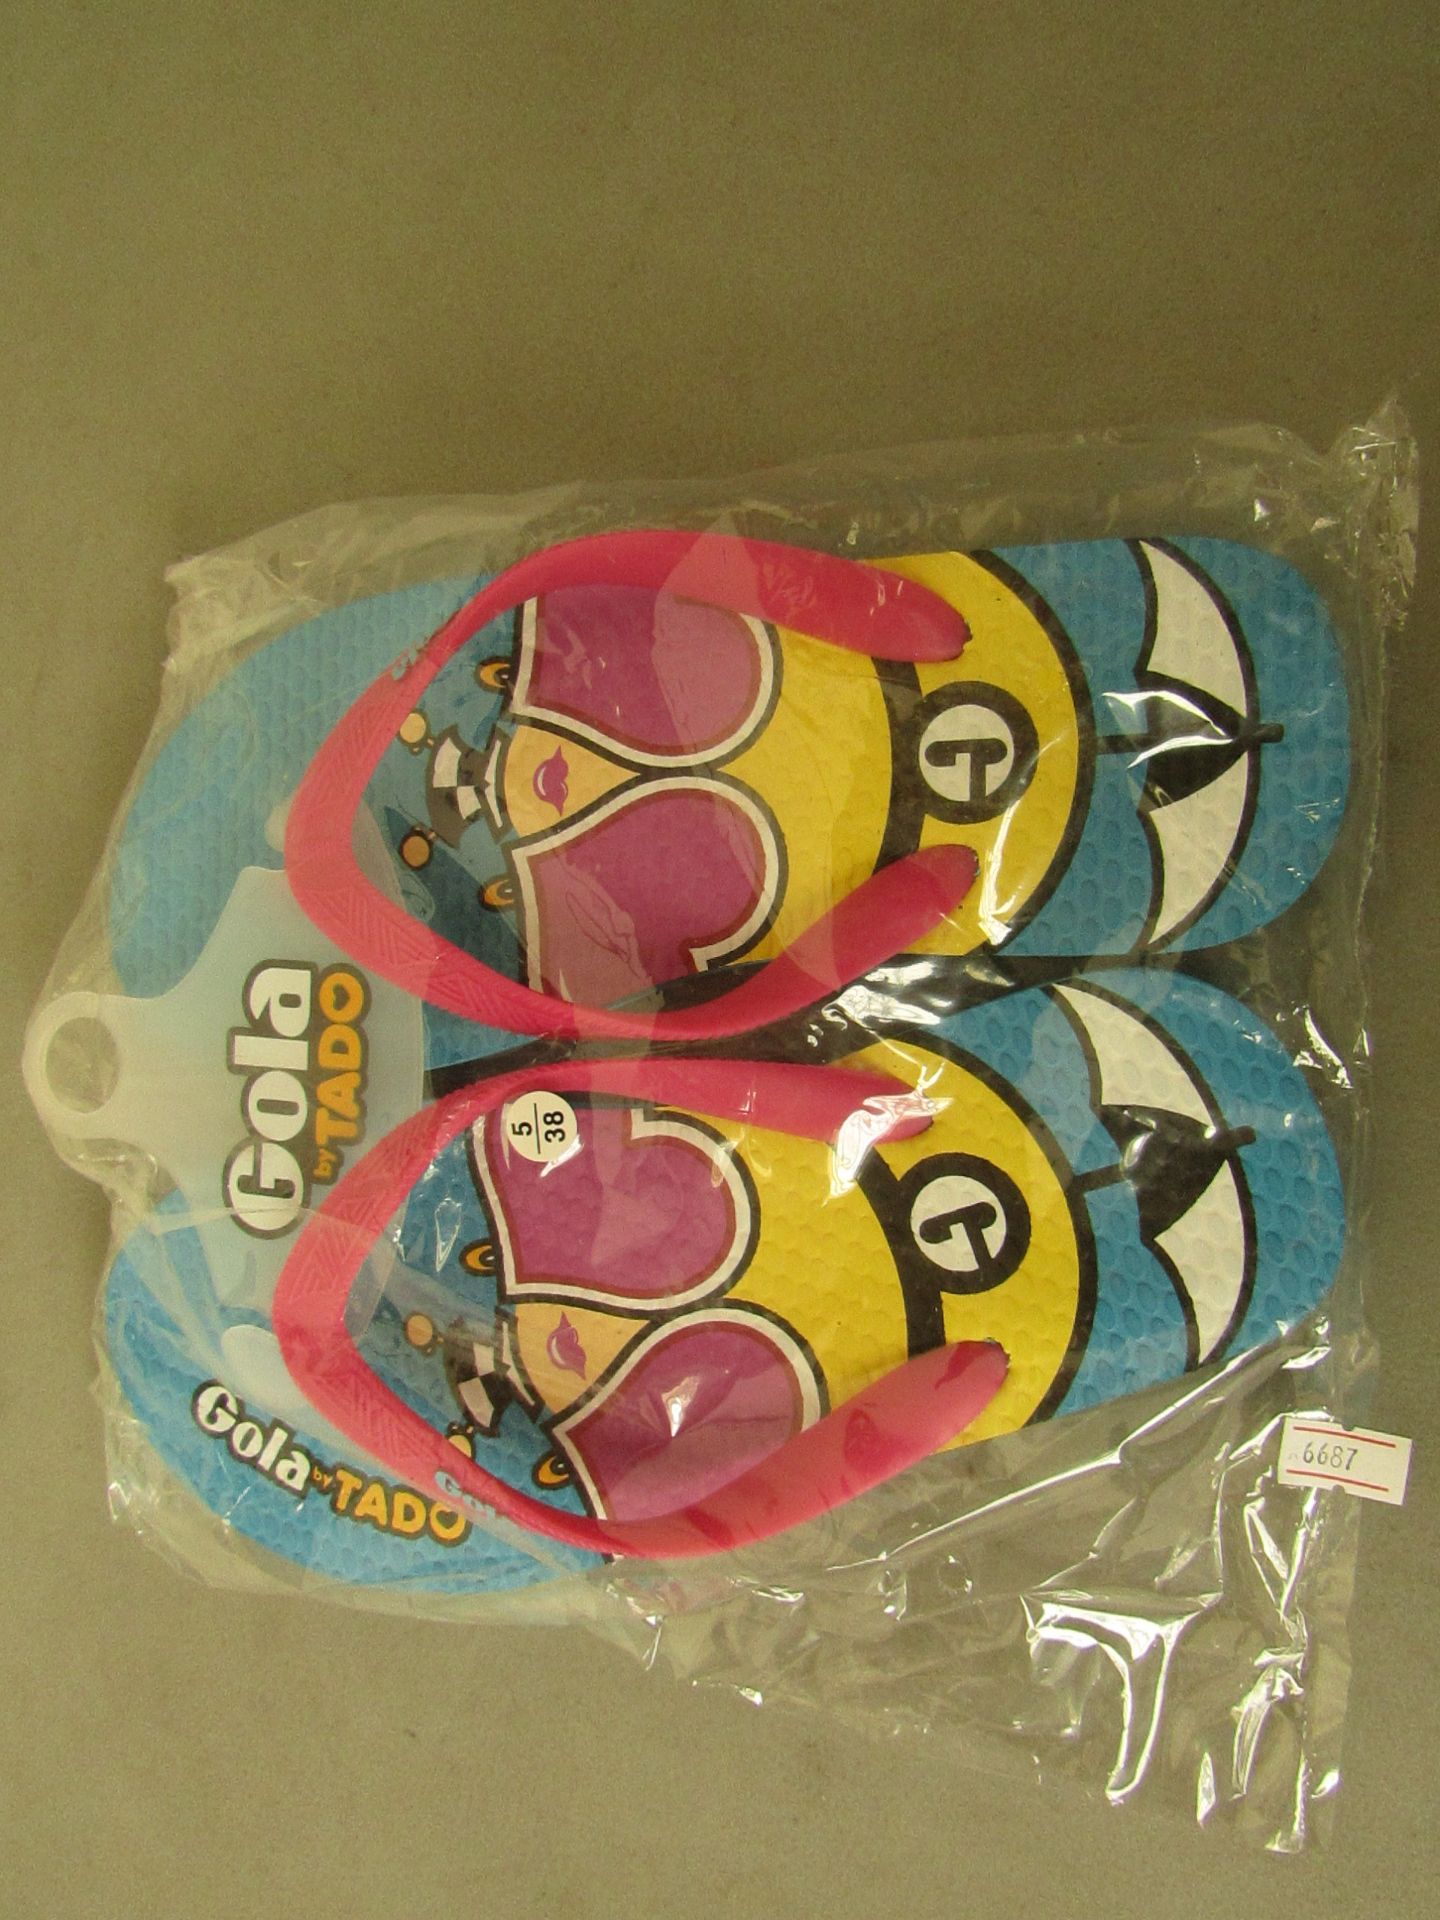 3 X Pairs Gola By Tado Flip Flops all size 5 all new in packaging